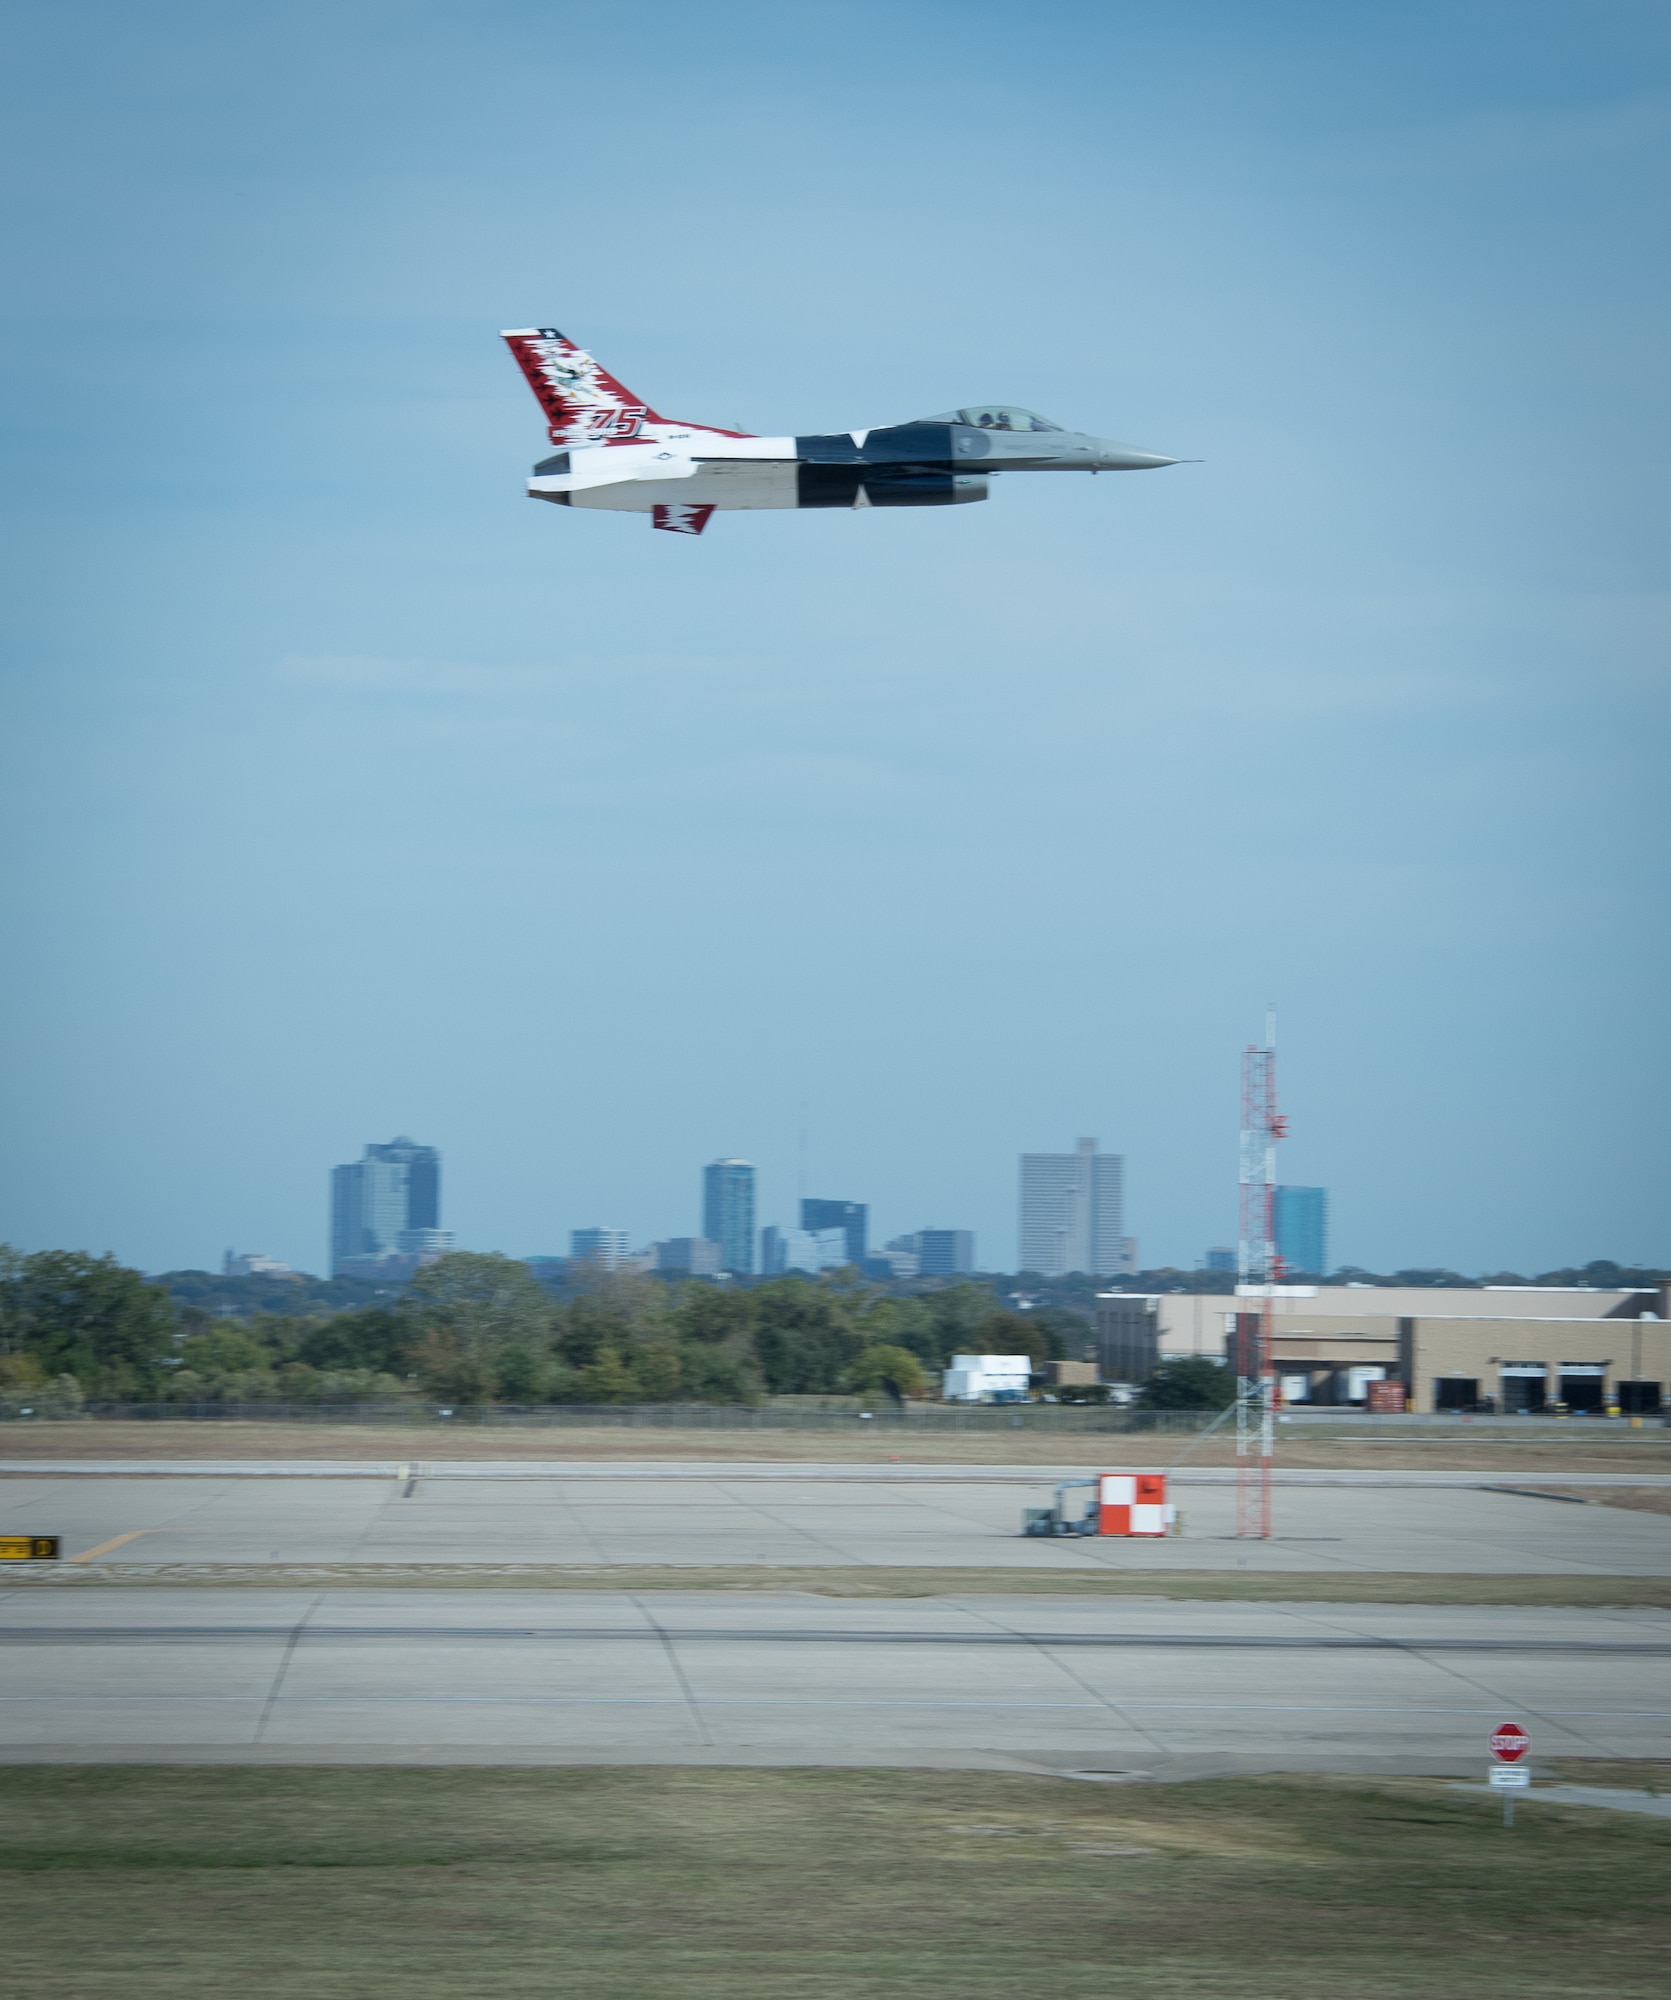 A 457th Fighter Squadron F-16 assigned to the 301st Fighter Wing, U.S. Naval Air Station Joint Reserve Base Fort Worth, Texas, flies above the Fort Worth skyline here on November 4, 2020. The 301 FW is the only Air Force Reserve Fighter unit in Texas. (U.S. Air Force photo by Jeremy Roman)